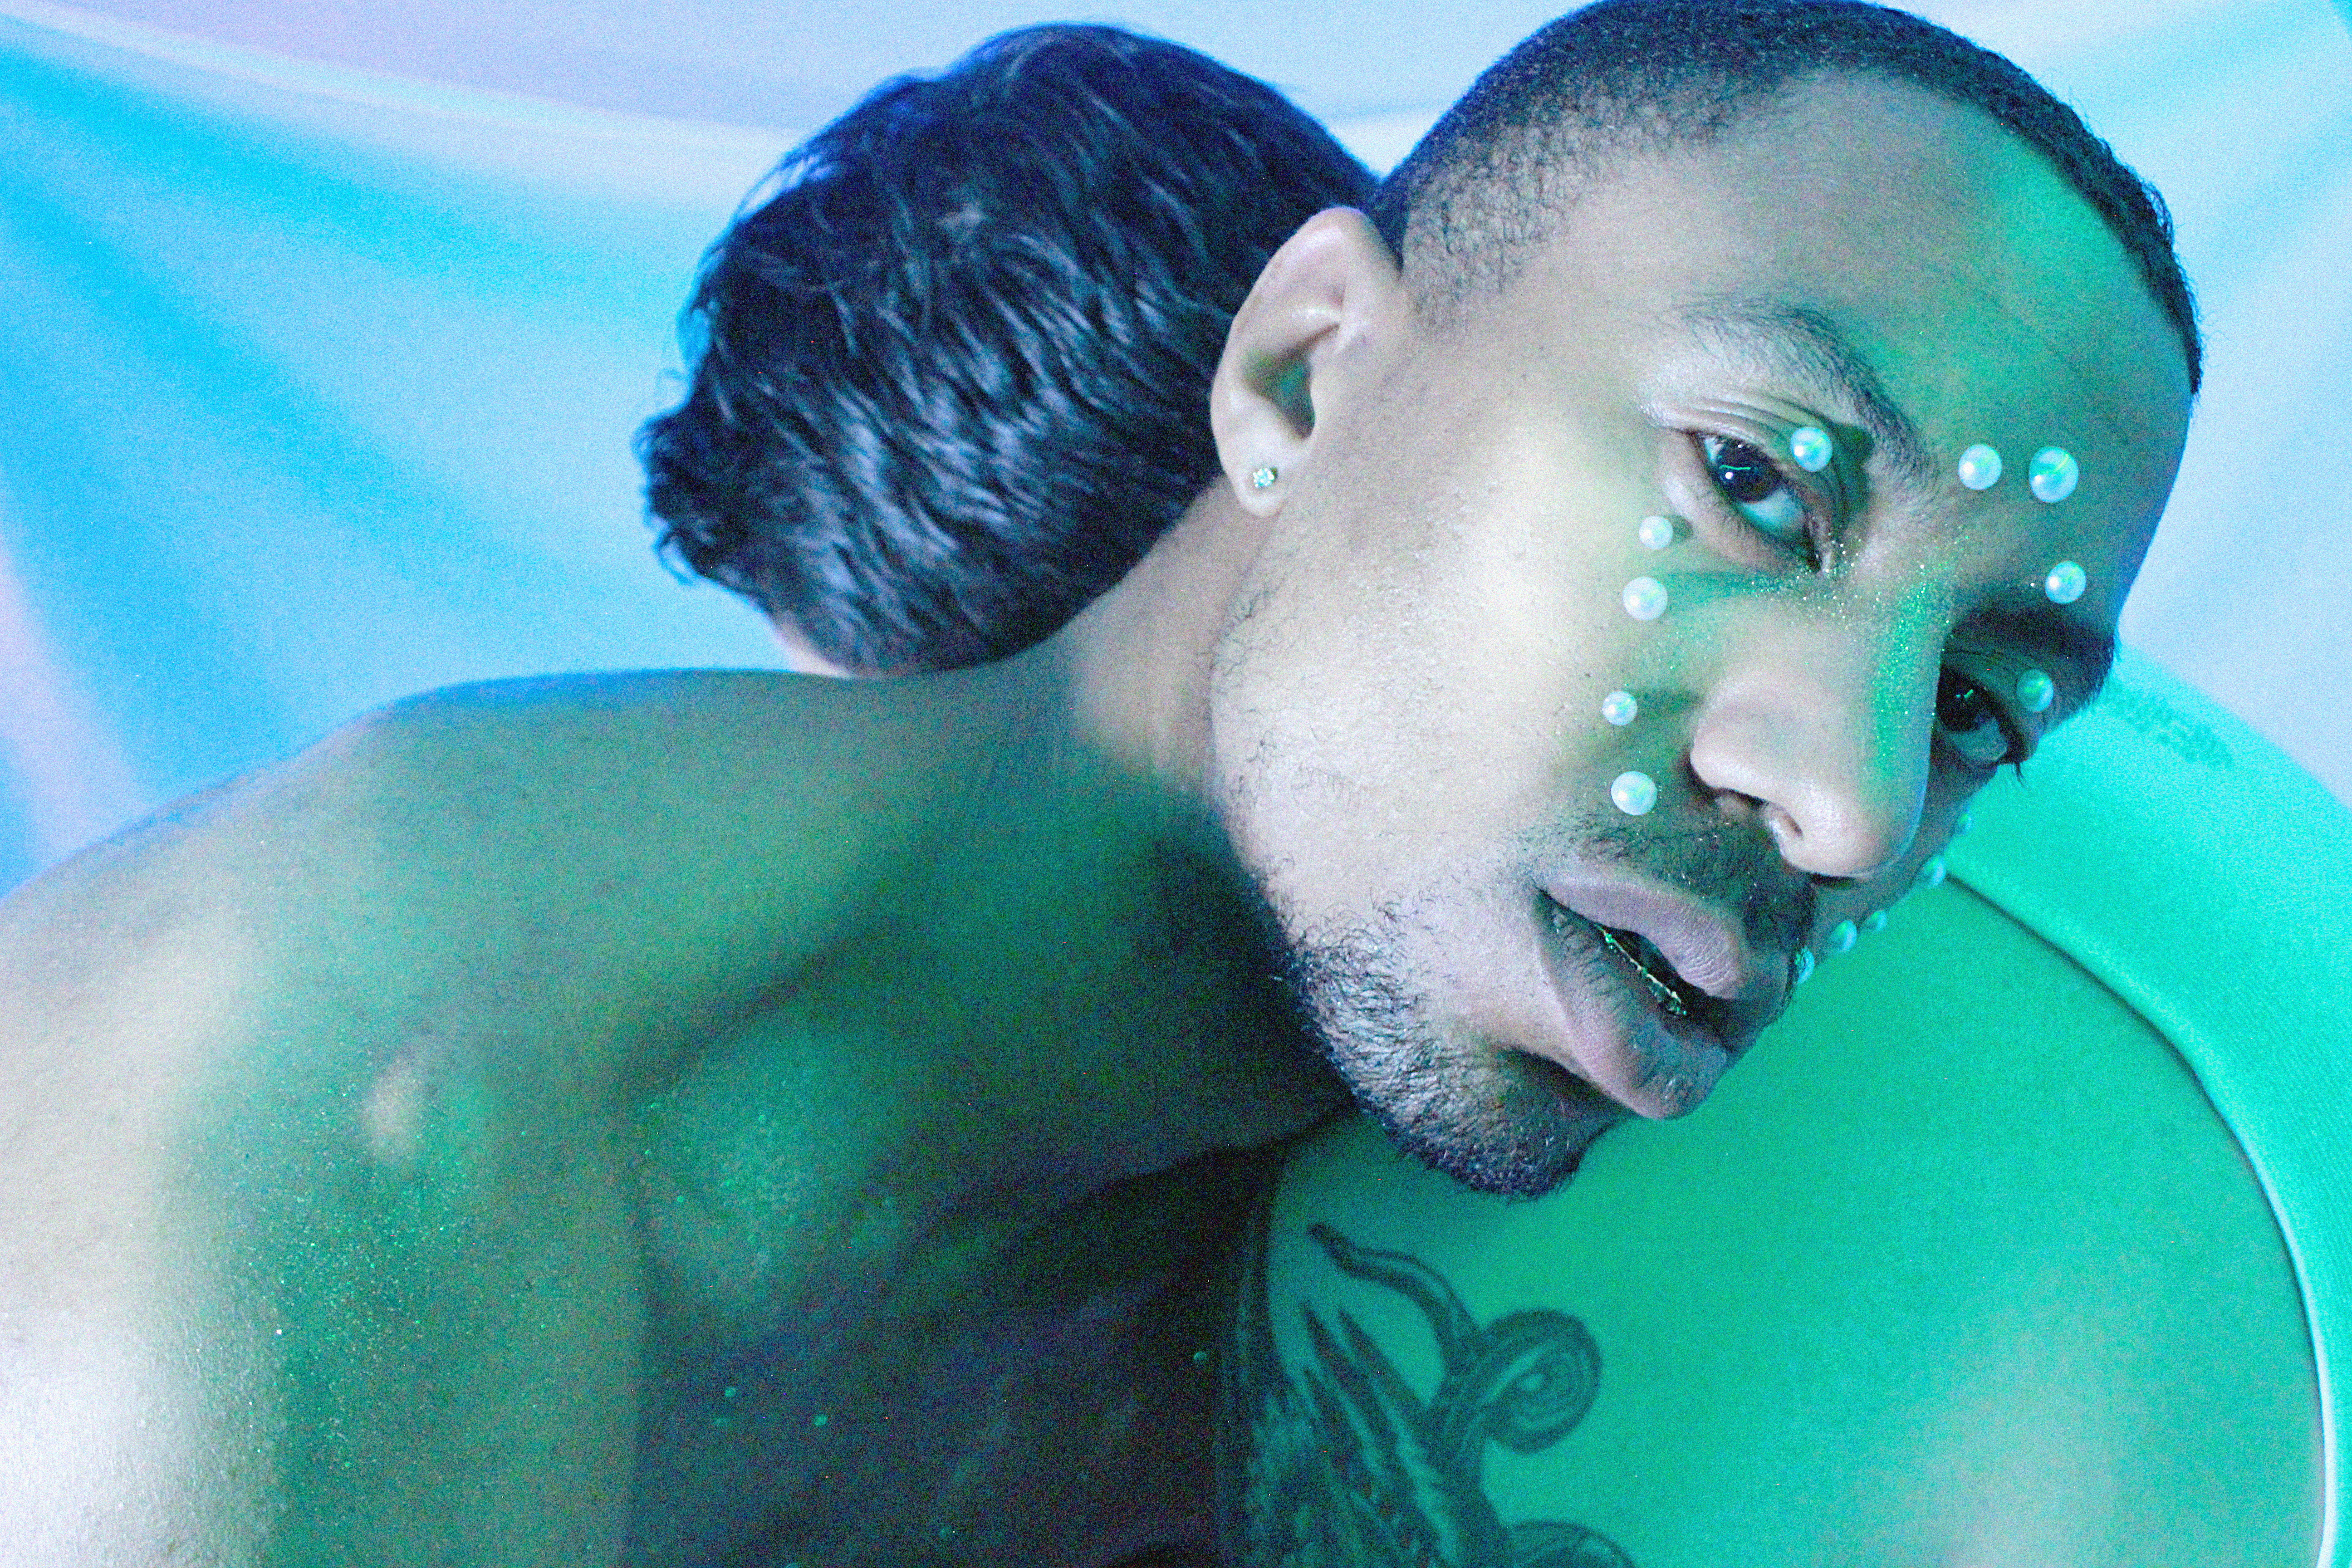 A photo of two men facing one and laying on one another’s shoulder. Only one of their faces is in view, and it’s covered in pearls. The photo looks as if it was taken underneath a blue/green hue and the backdrop is comprised of the colors blue, purple, and green.